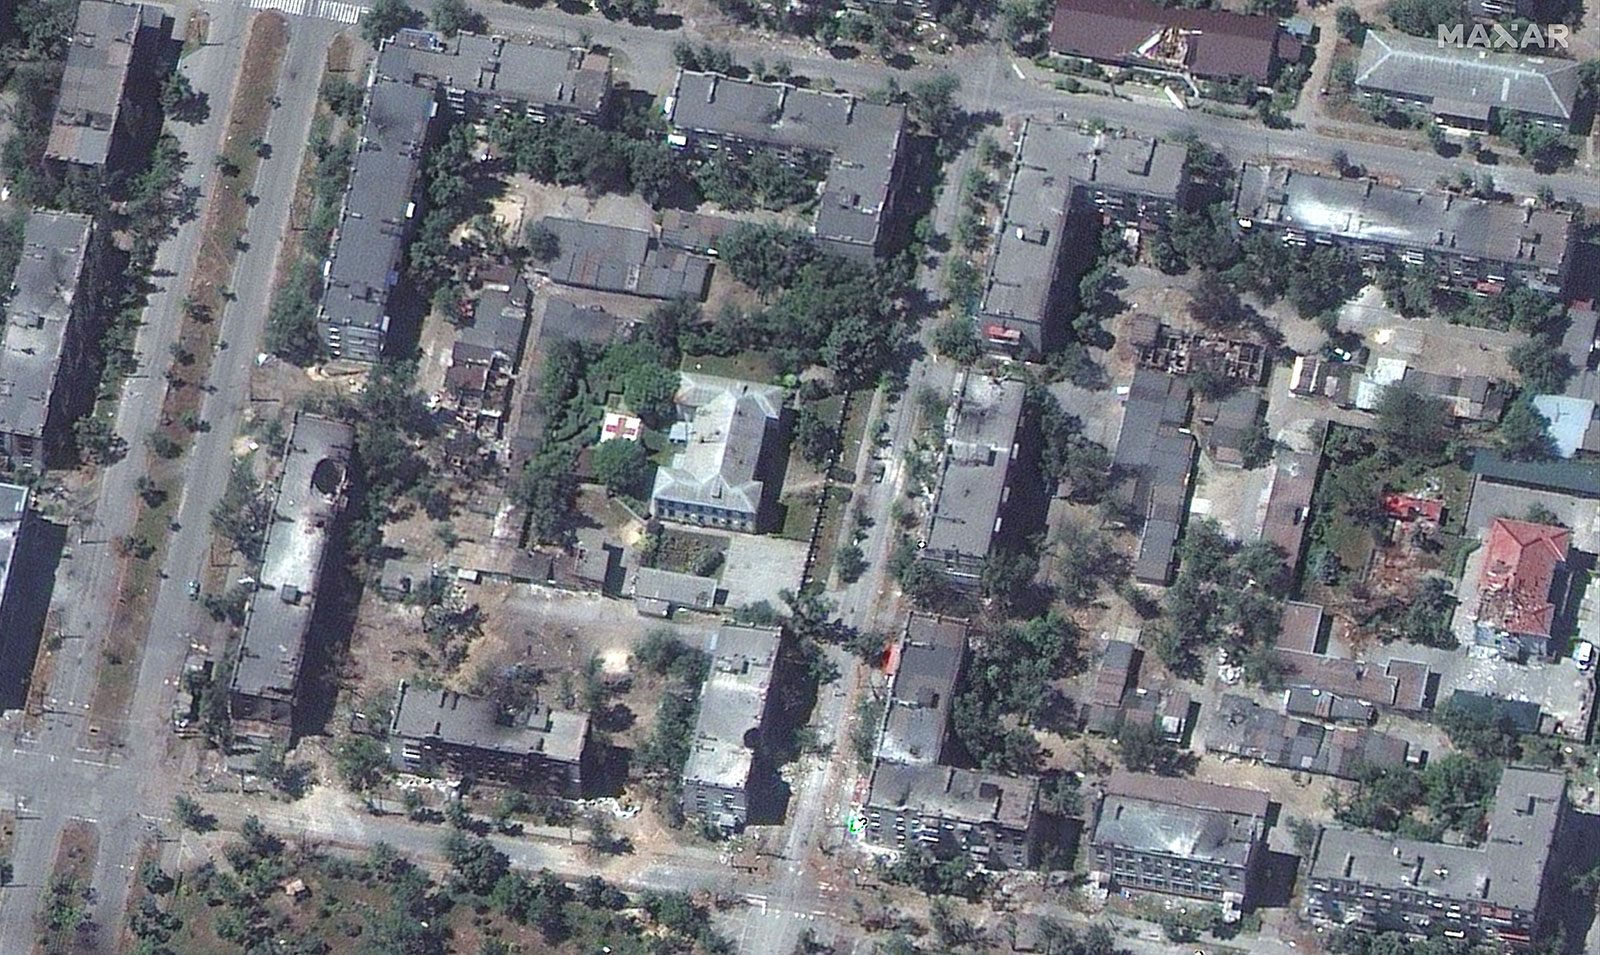 A satellite image shows damage caused by military strikes in Severodonetsk, Ukraine, on June 6.